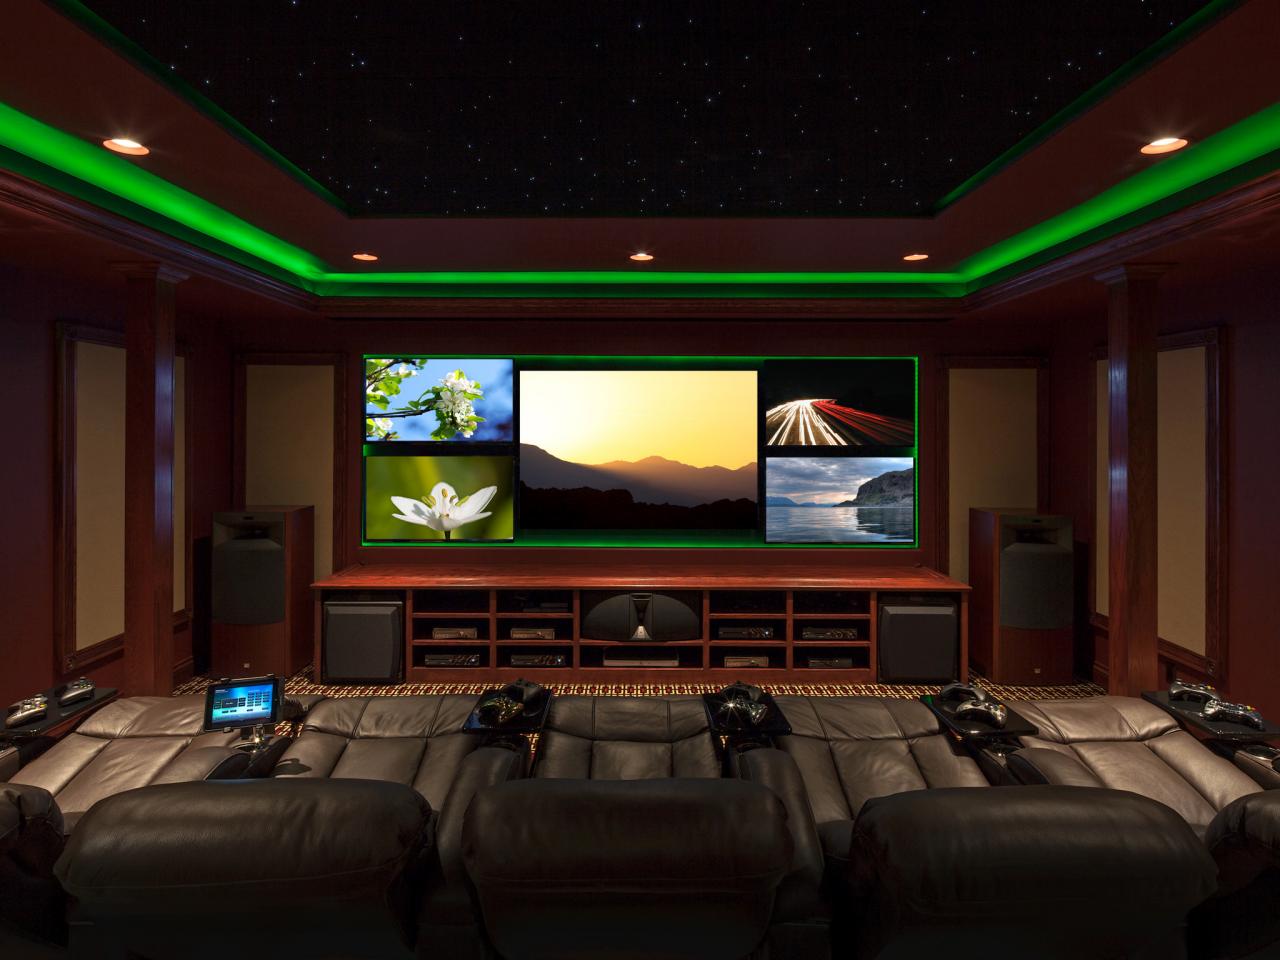 Media Room Five Impressive Media Room Design With Five Different Flat Screened TV On The Wall Complete Media Players And Black Cushioned Seats For Media Room Ideas Decoration Decorative Media Room Ideas In Contemporary Design